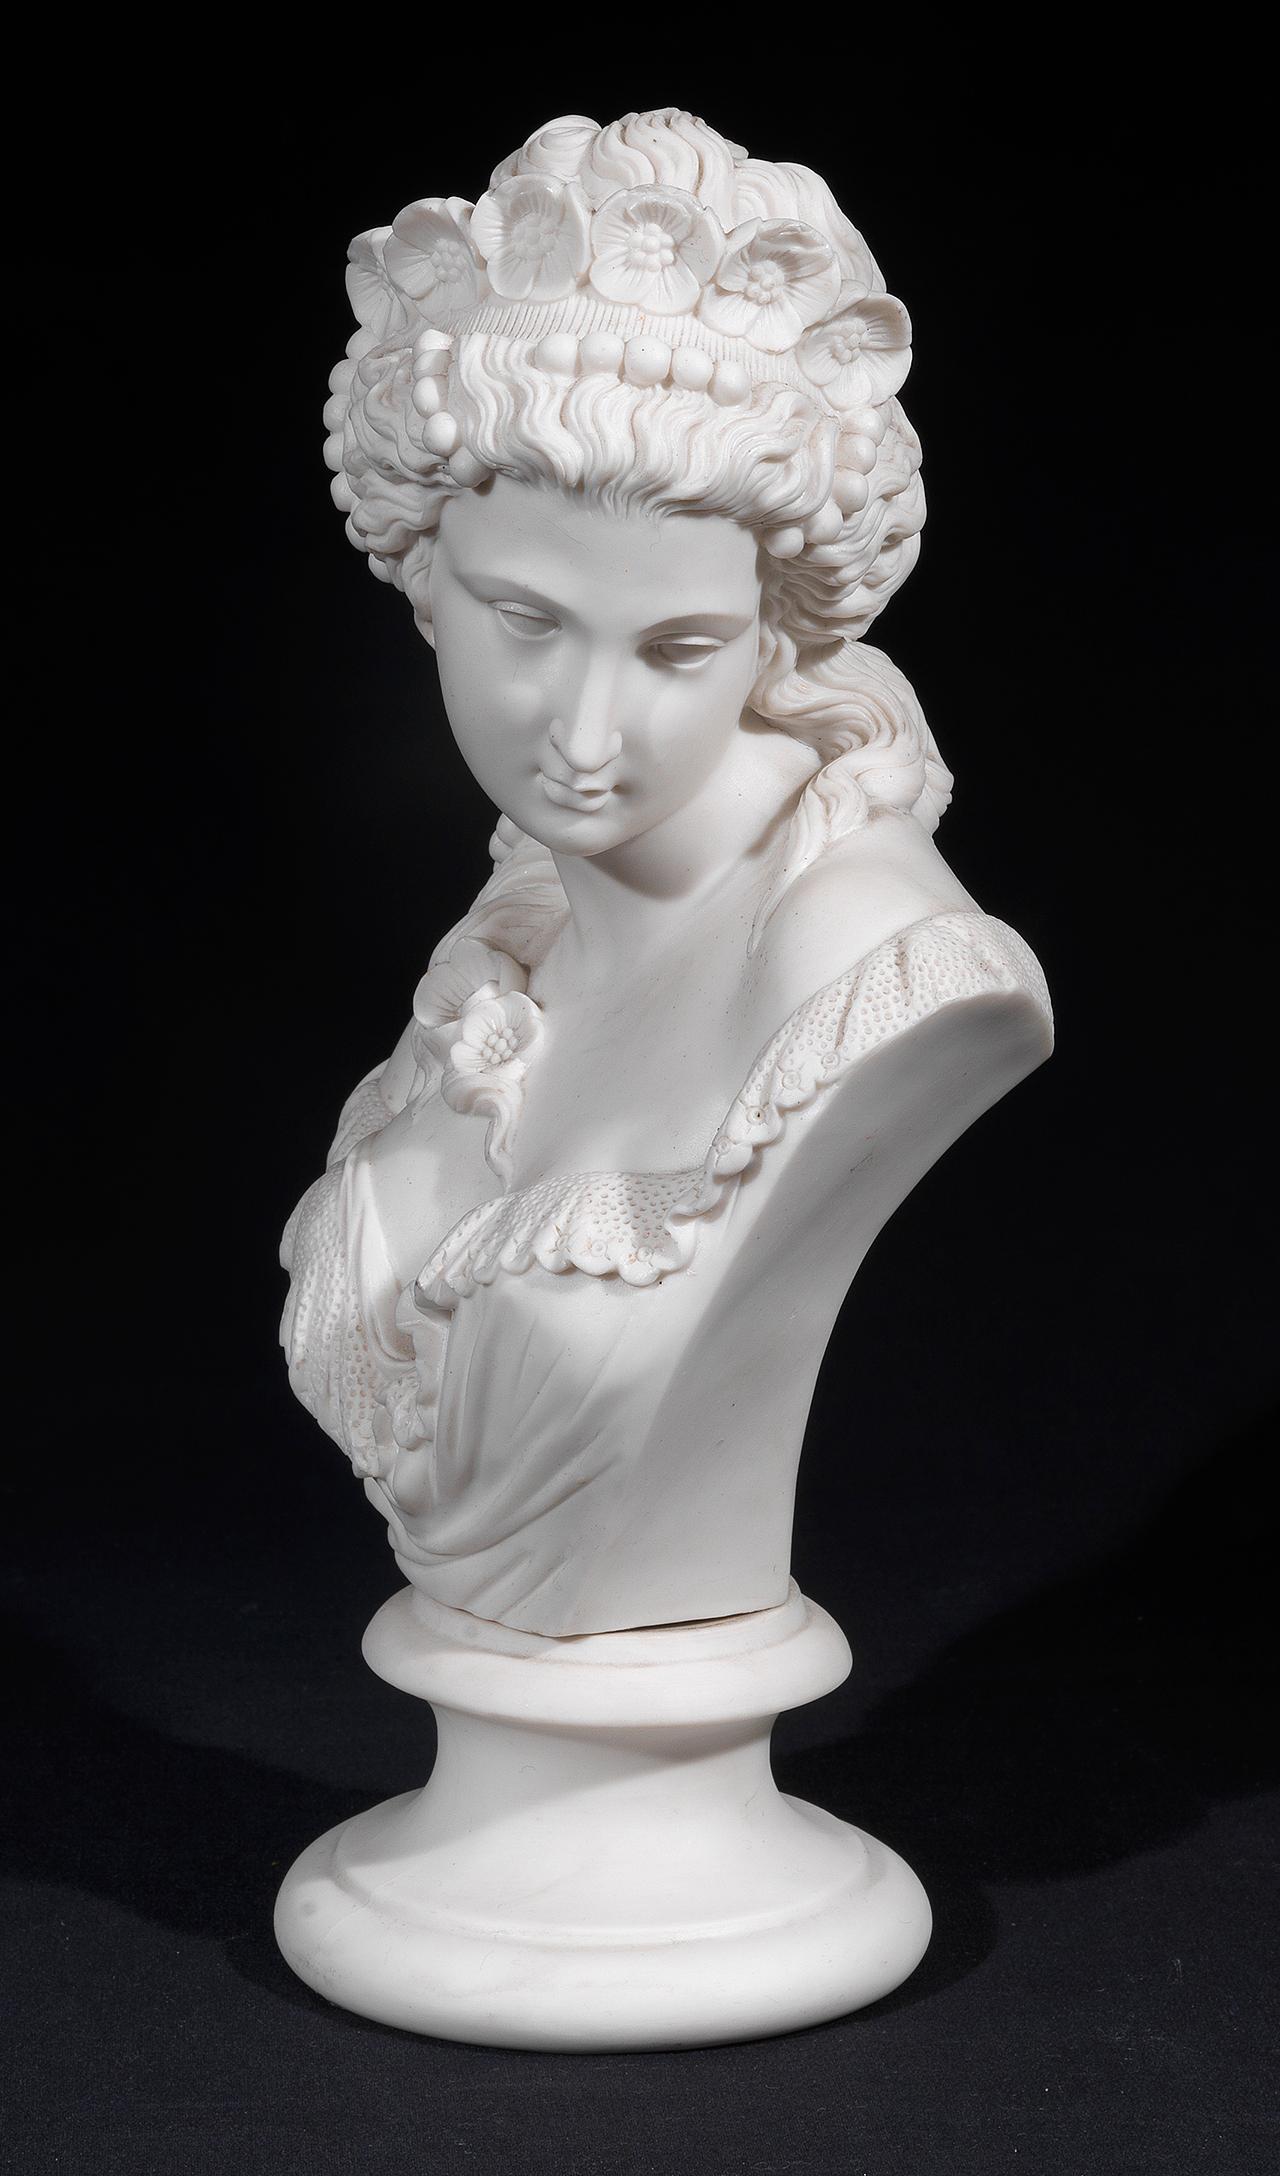 SHIPPING POLICY:
No additional costs will be added to this order.
Shipping costs will be totally covered by the seller (customs duties included). 

An attractive Copeland Parian ware bust of flora, showing a girl with her head turned to the left and